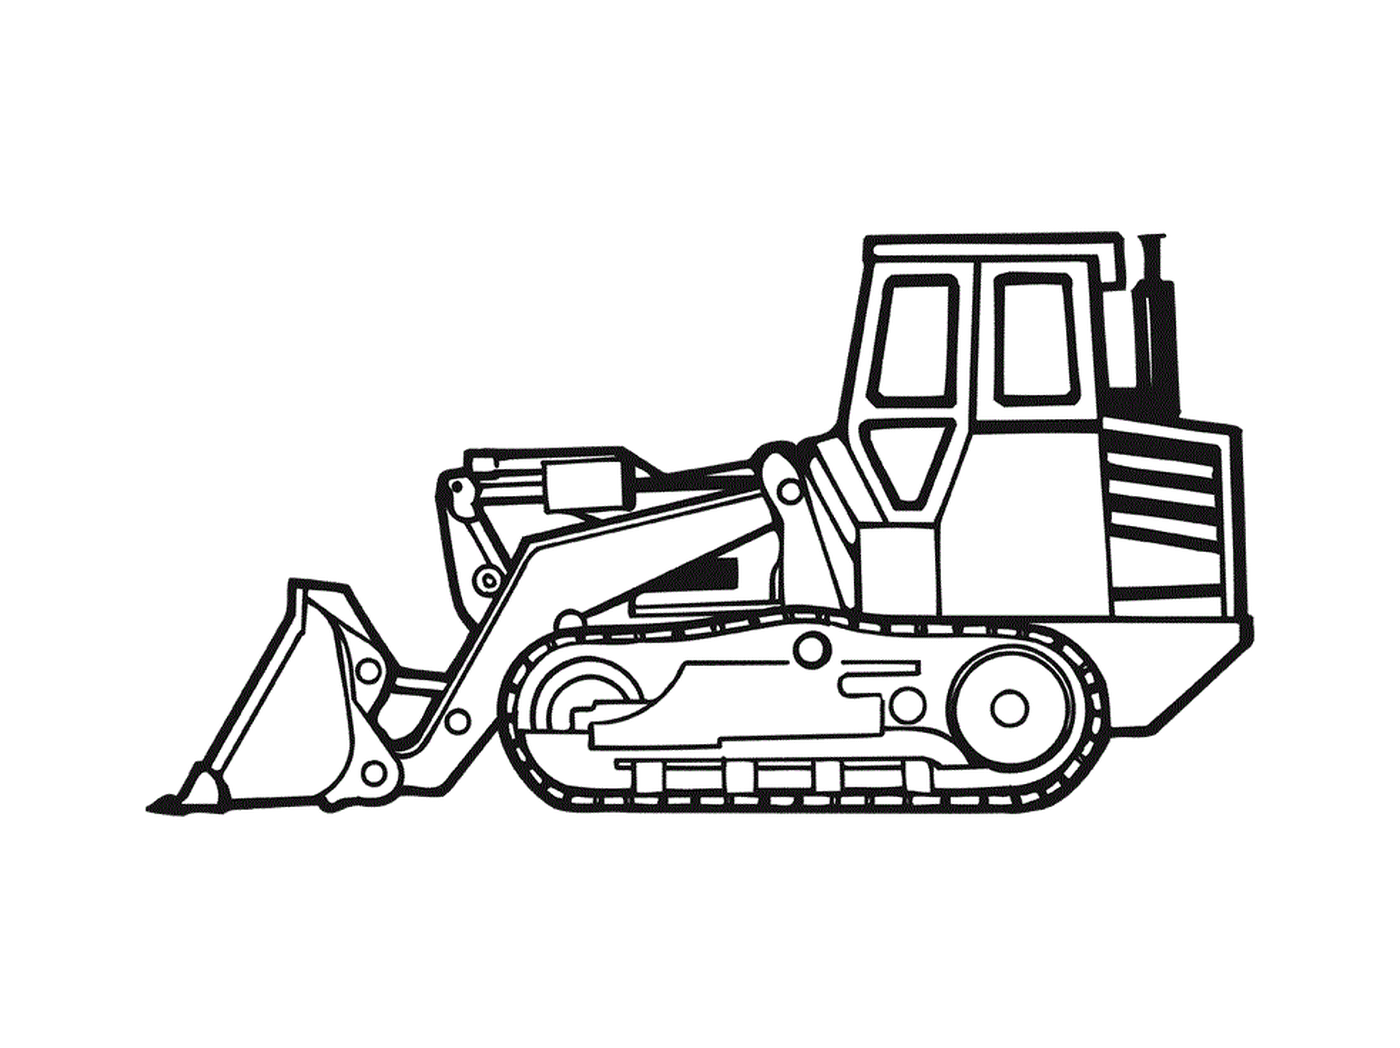  Robust and efficient Tractor 